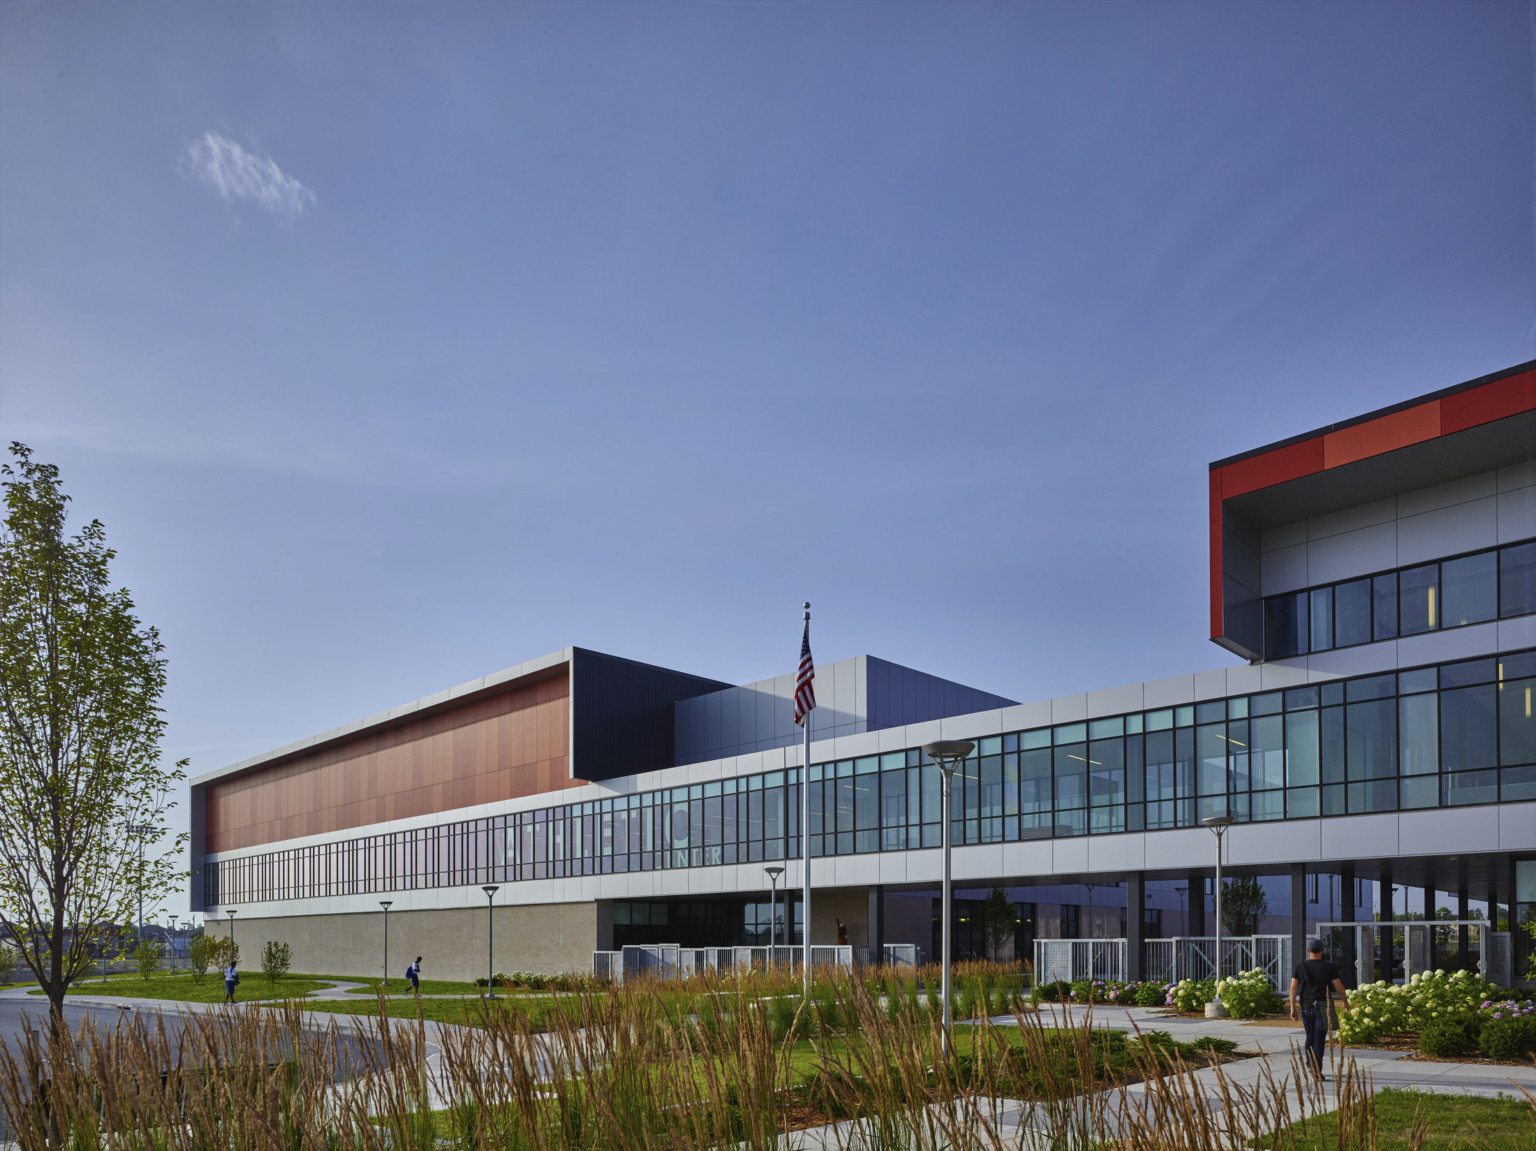 high school with glass and brick facade and tall native grass landscaping with sidewalks crossing through